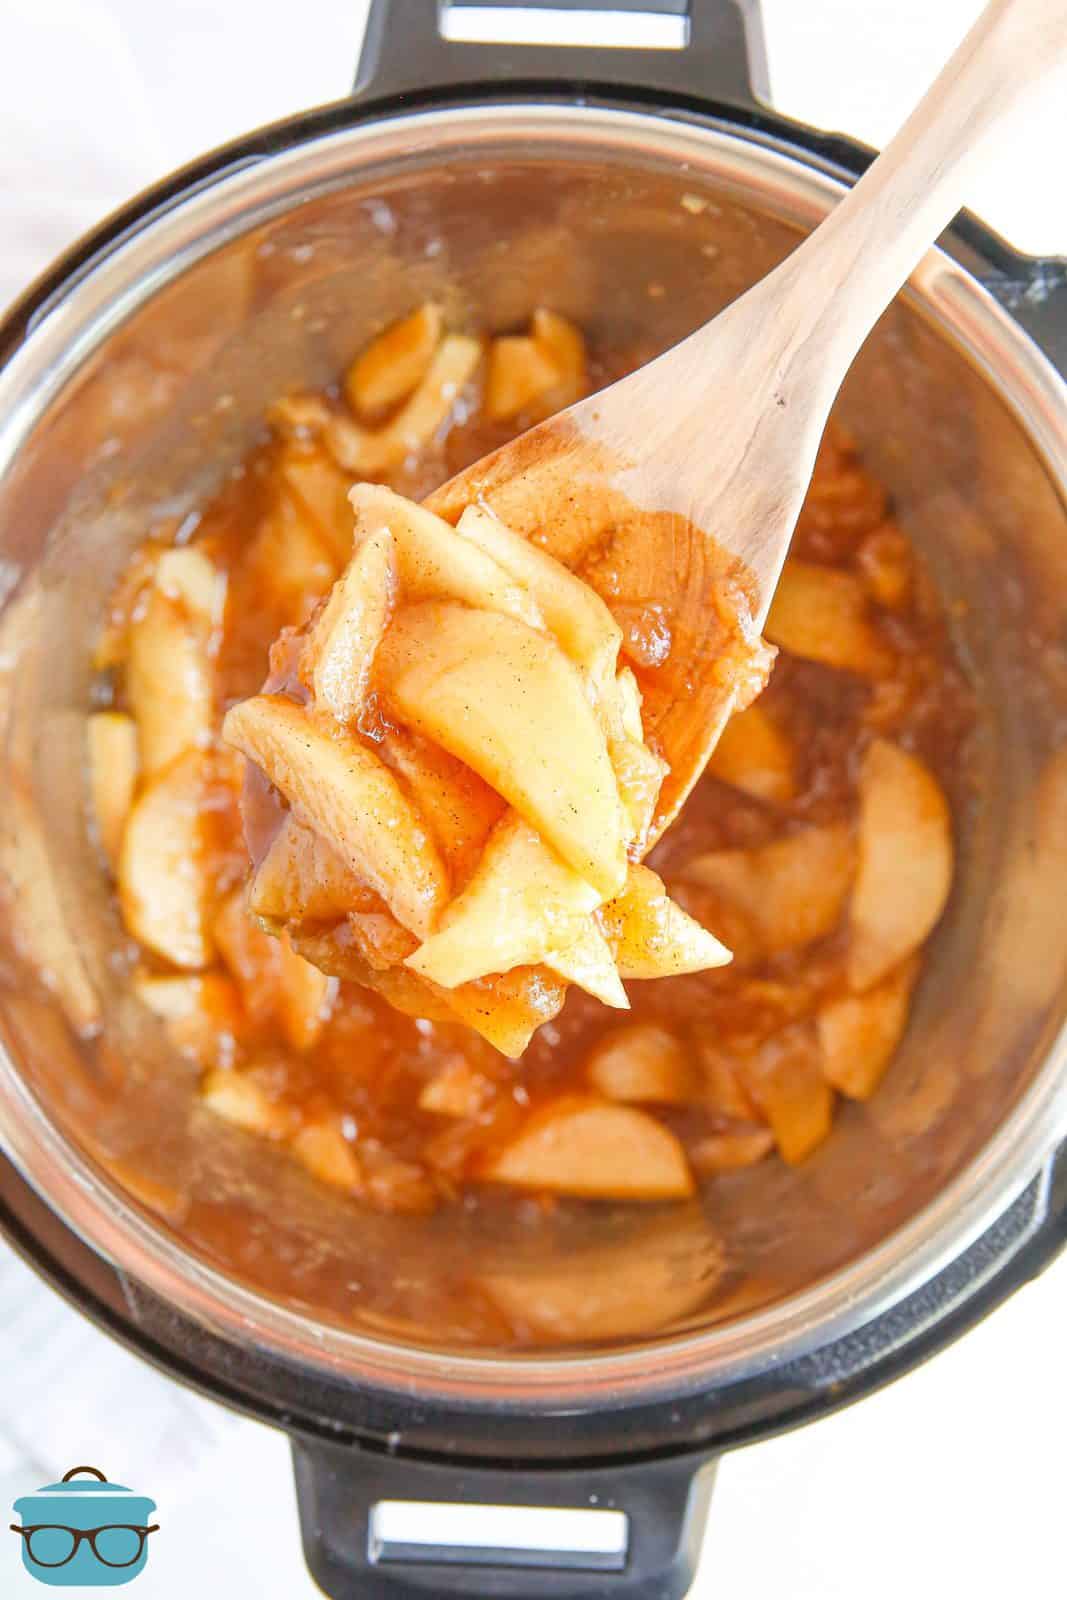 Wooden spoon lifting up Fried Apples out of instant pot.